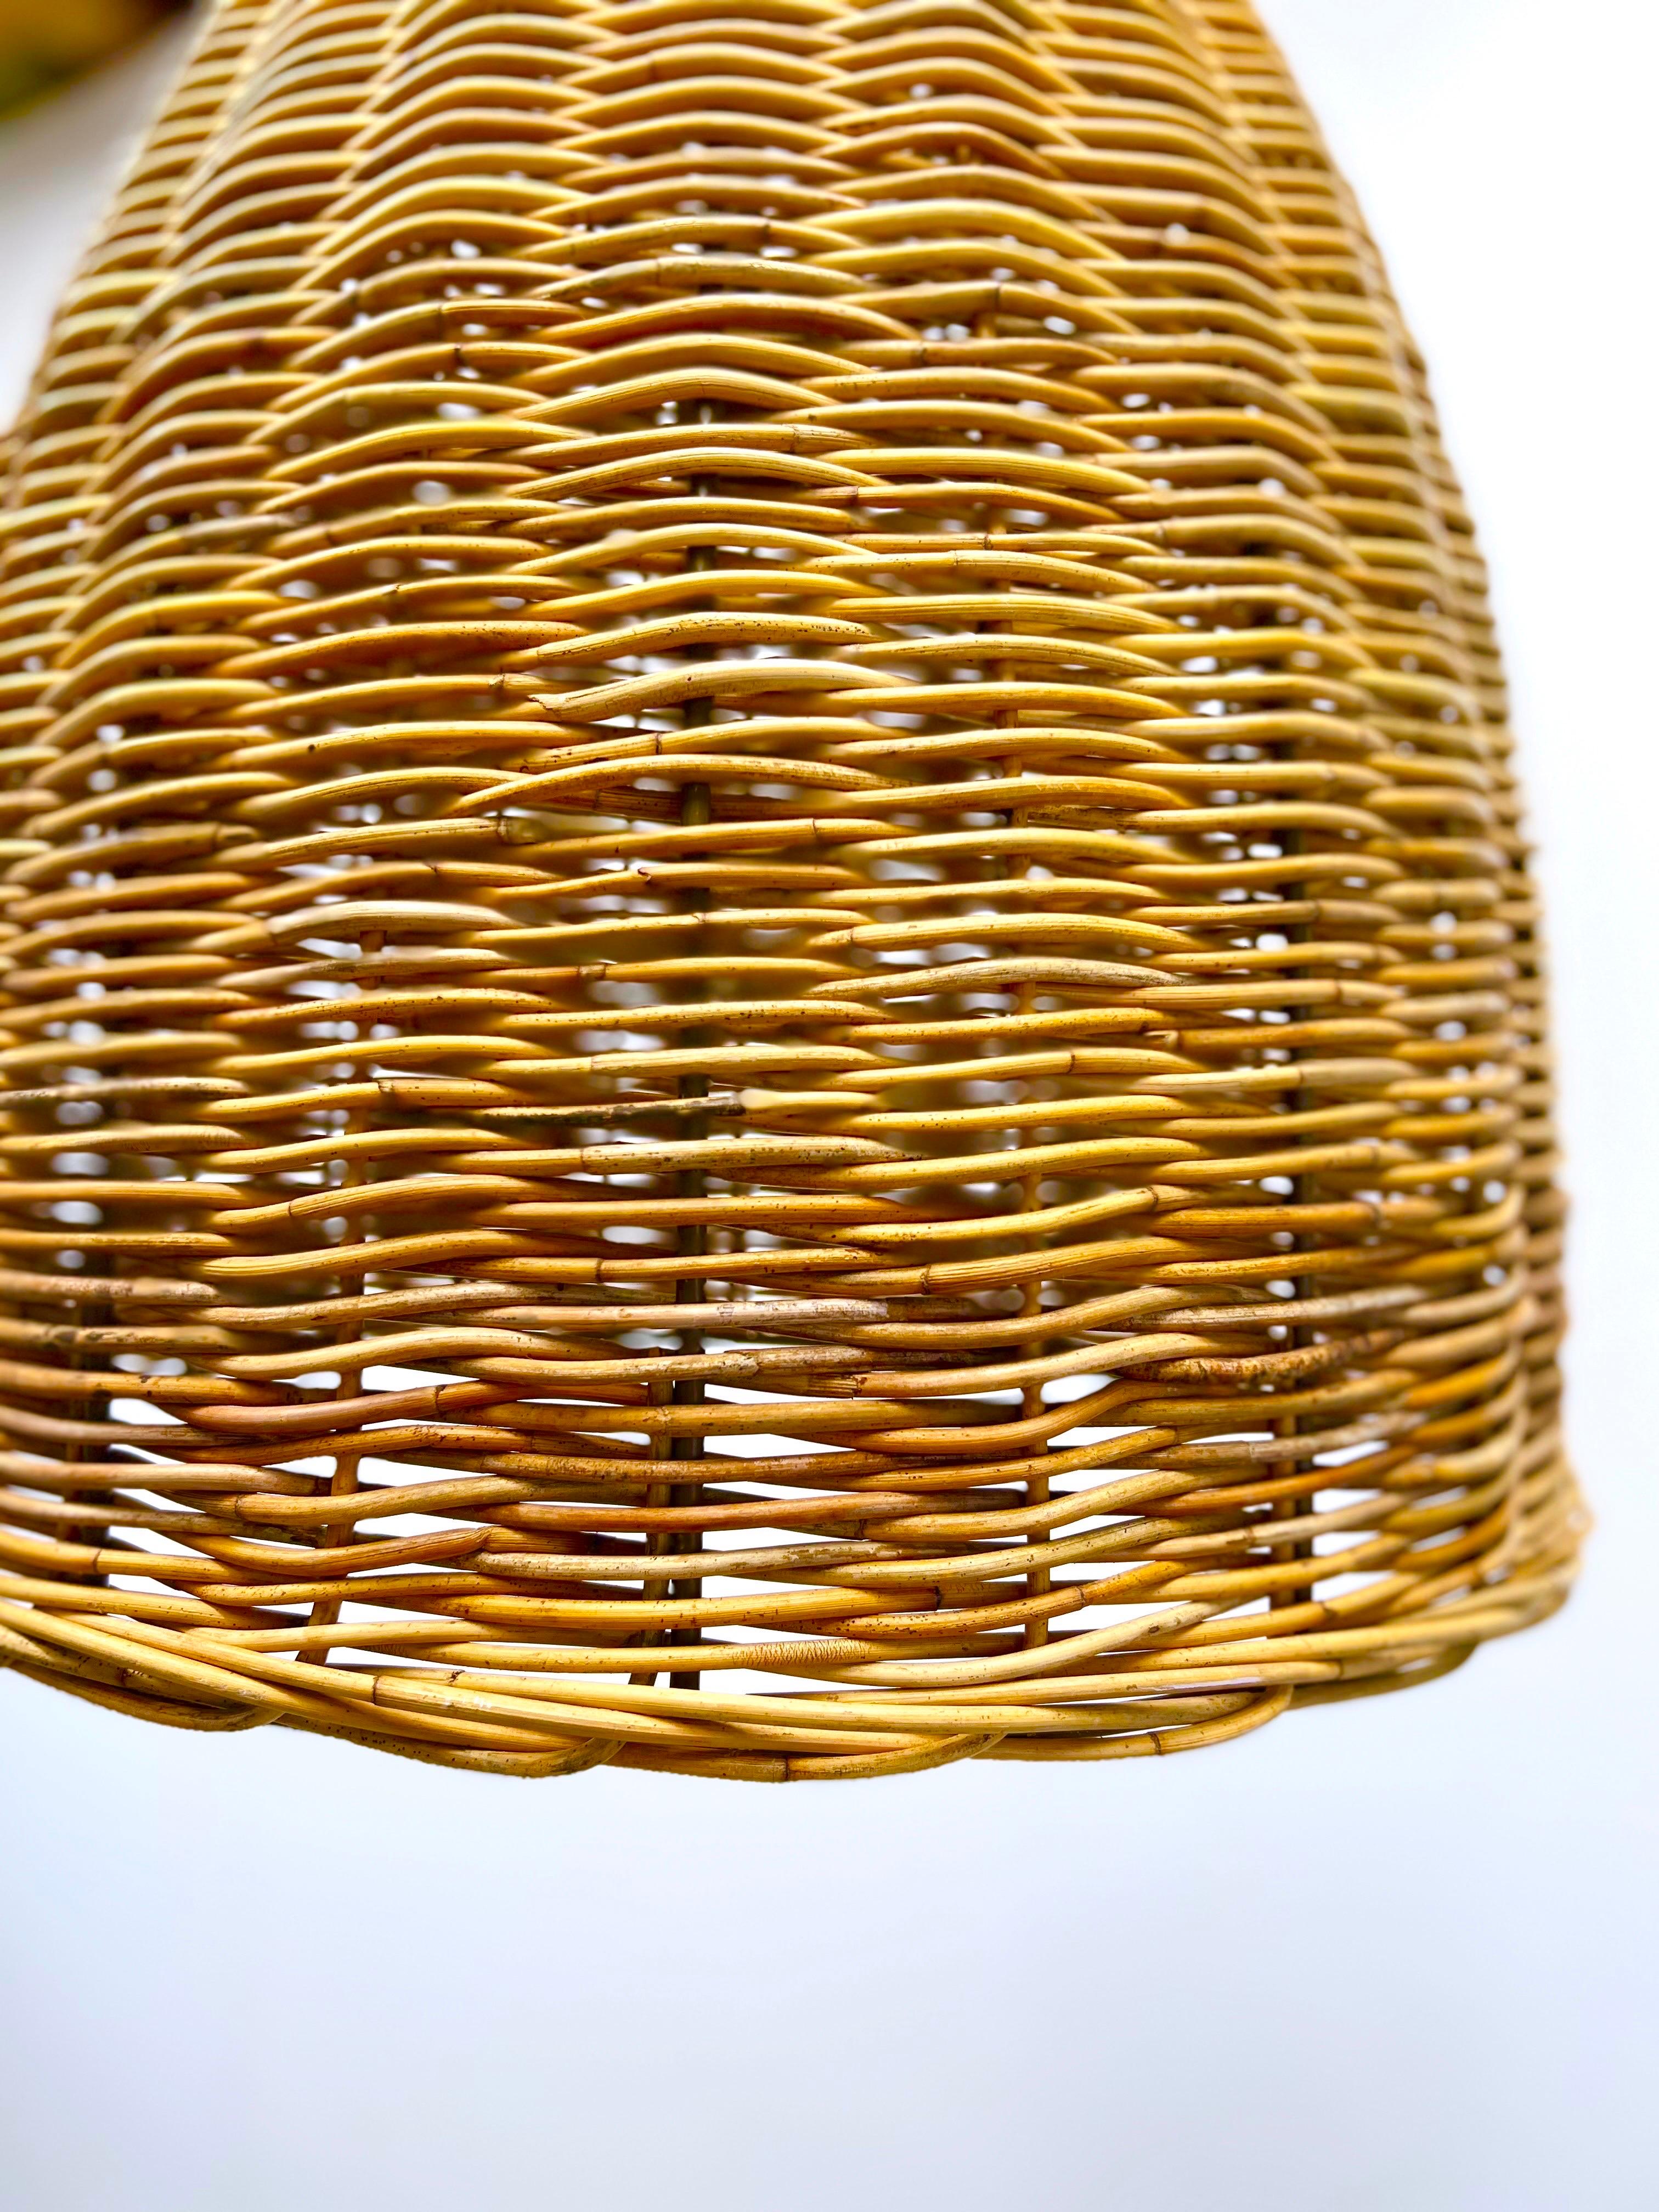 Bohemian 21st Century Currey and Company Large Rattan Basket Pendant Light For Sale